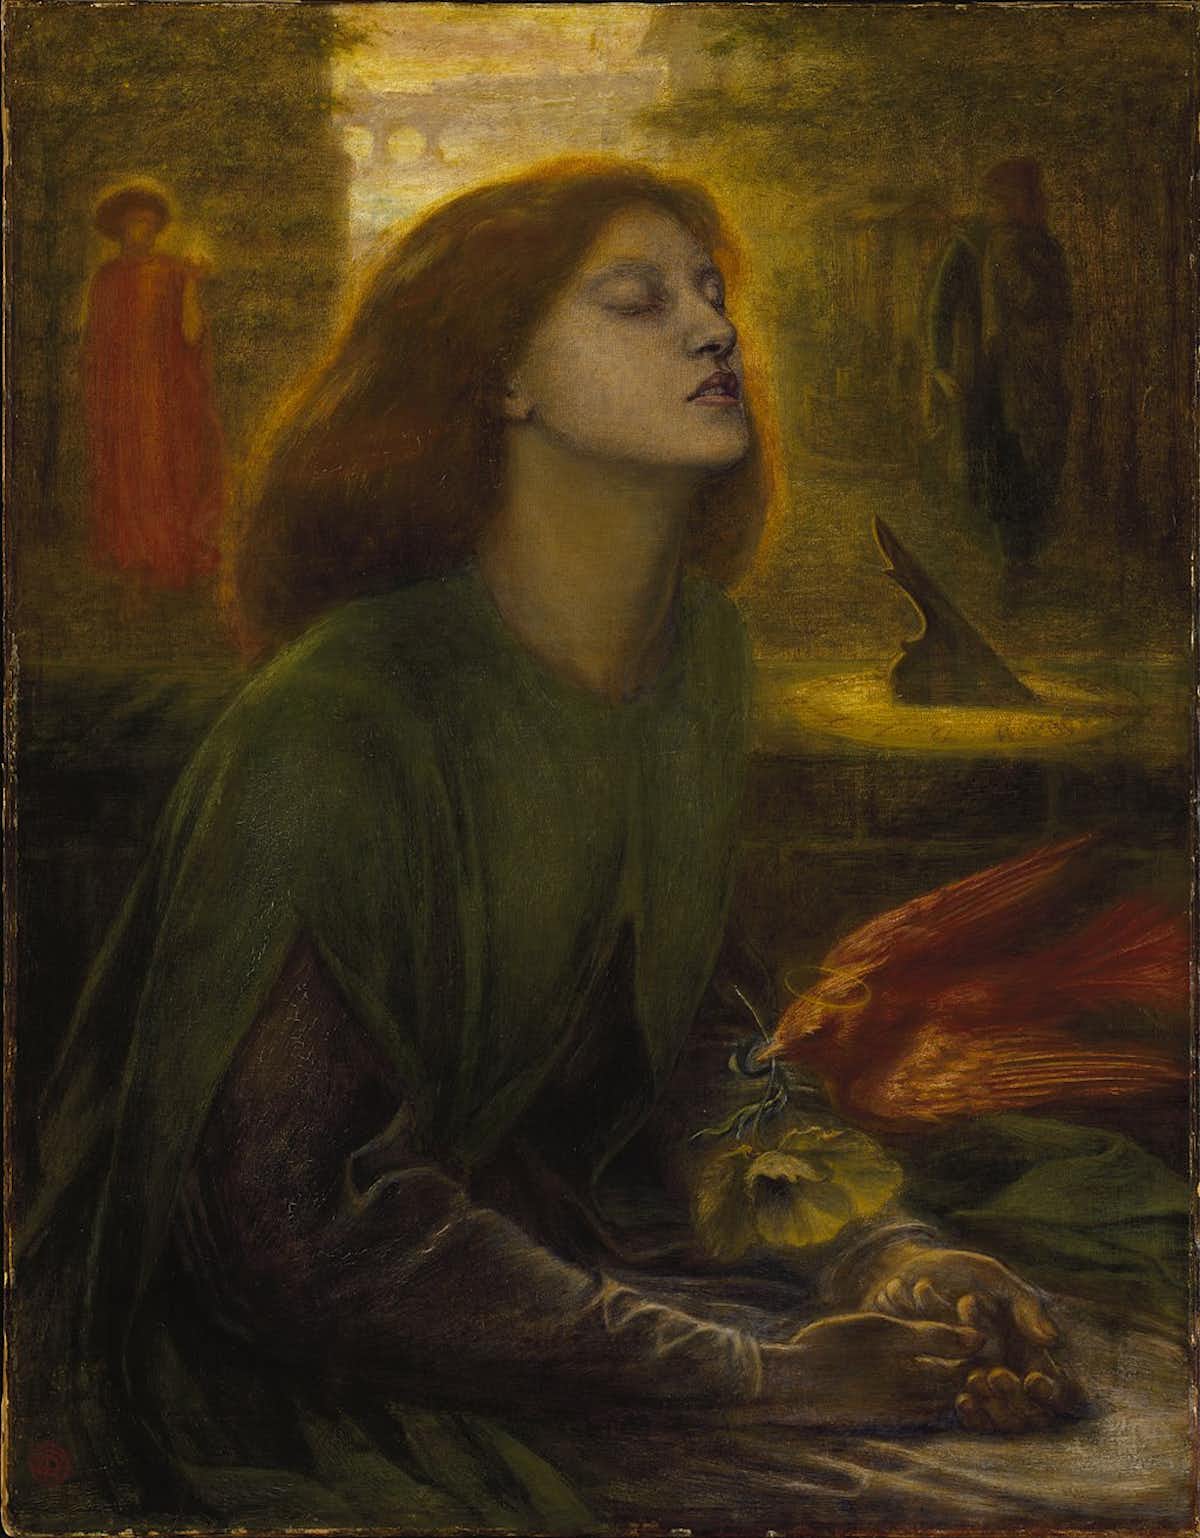 Beatrice closes her eyes and looks skyward, her palms together. She has red hair, pushed away from her face. Beata Beatrix by Dante Gabriel Rossetti (1864-70), a depiction of Dante’s Beatrice. Tate, CC BY-NC